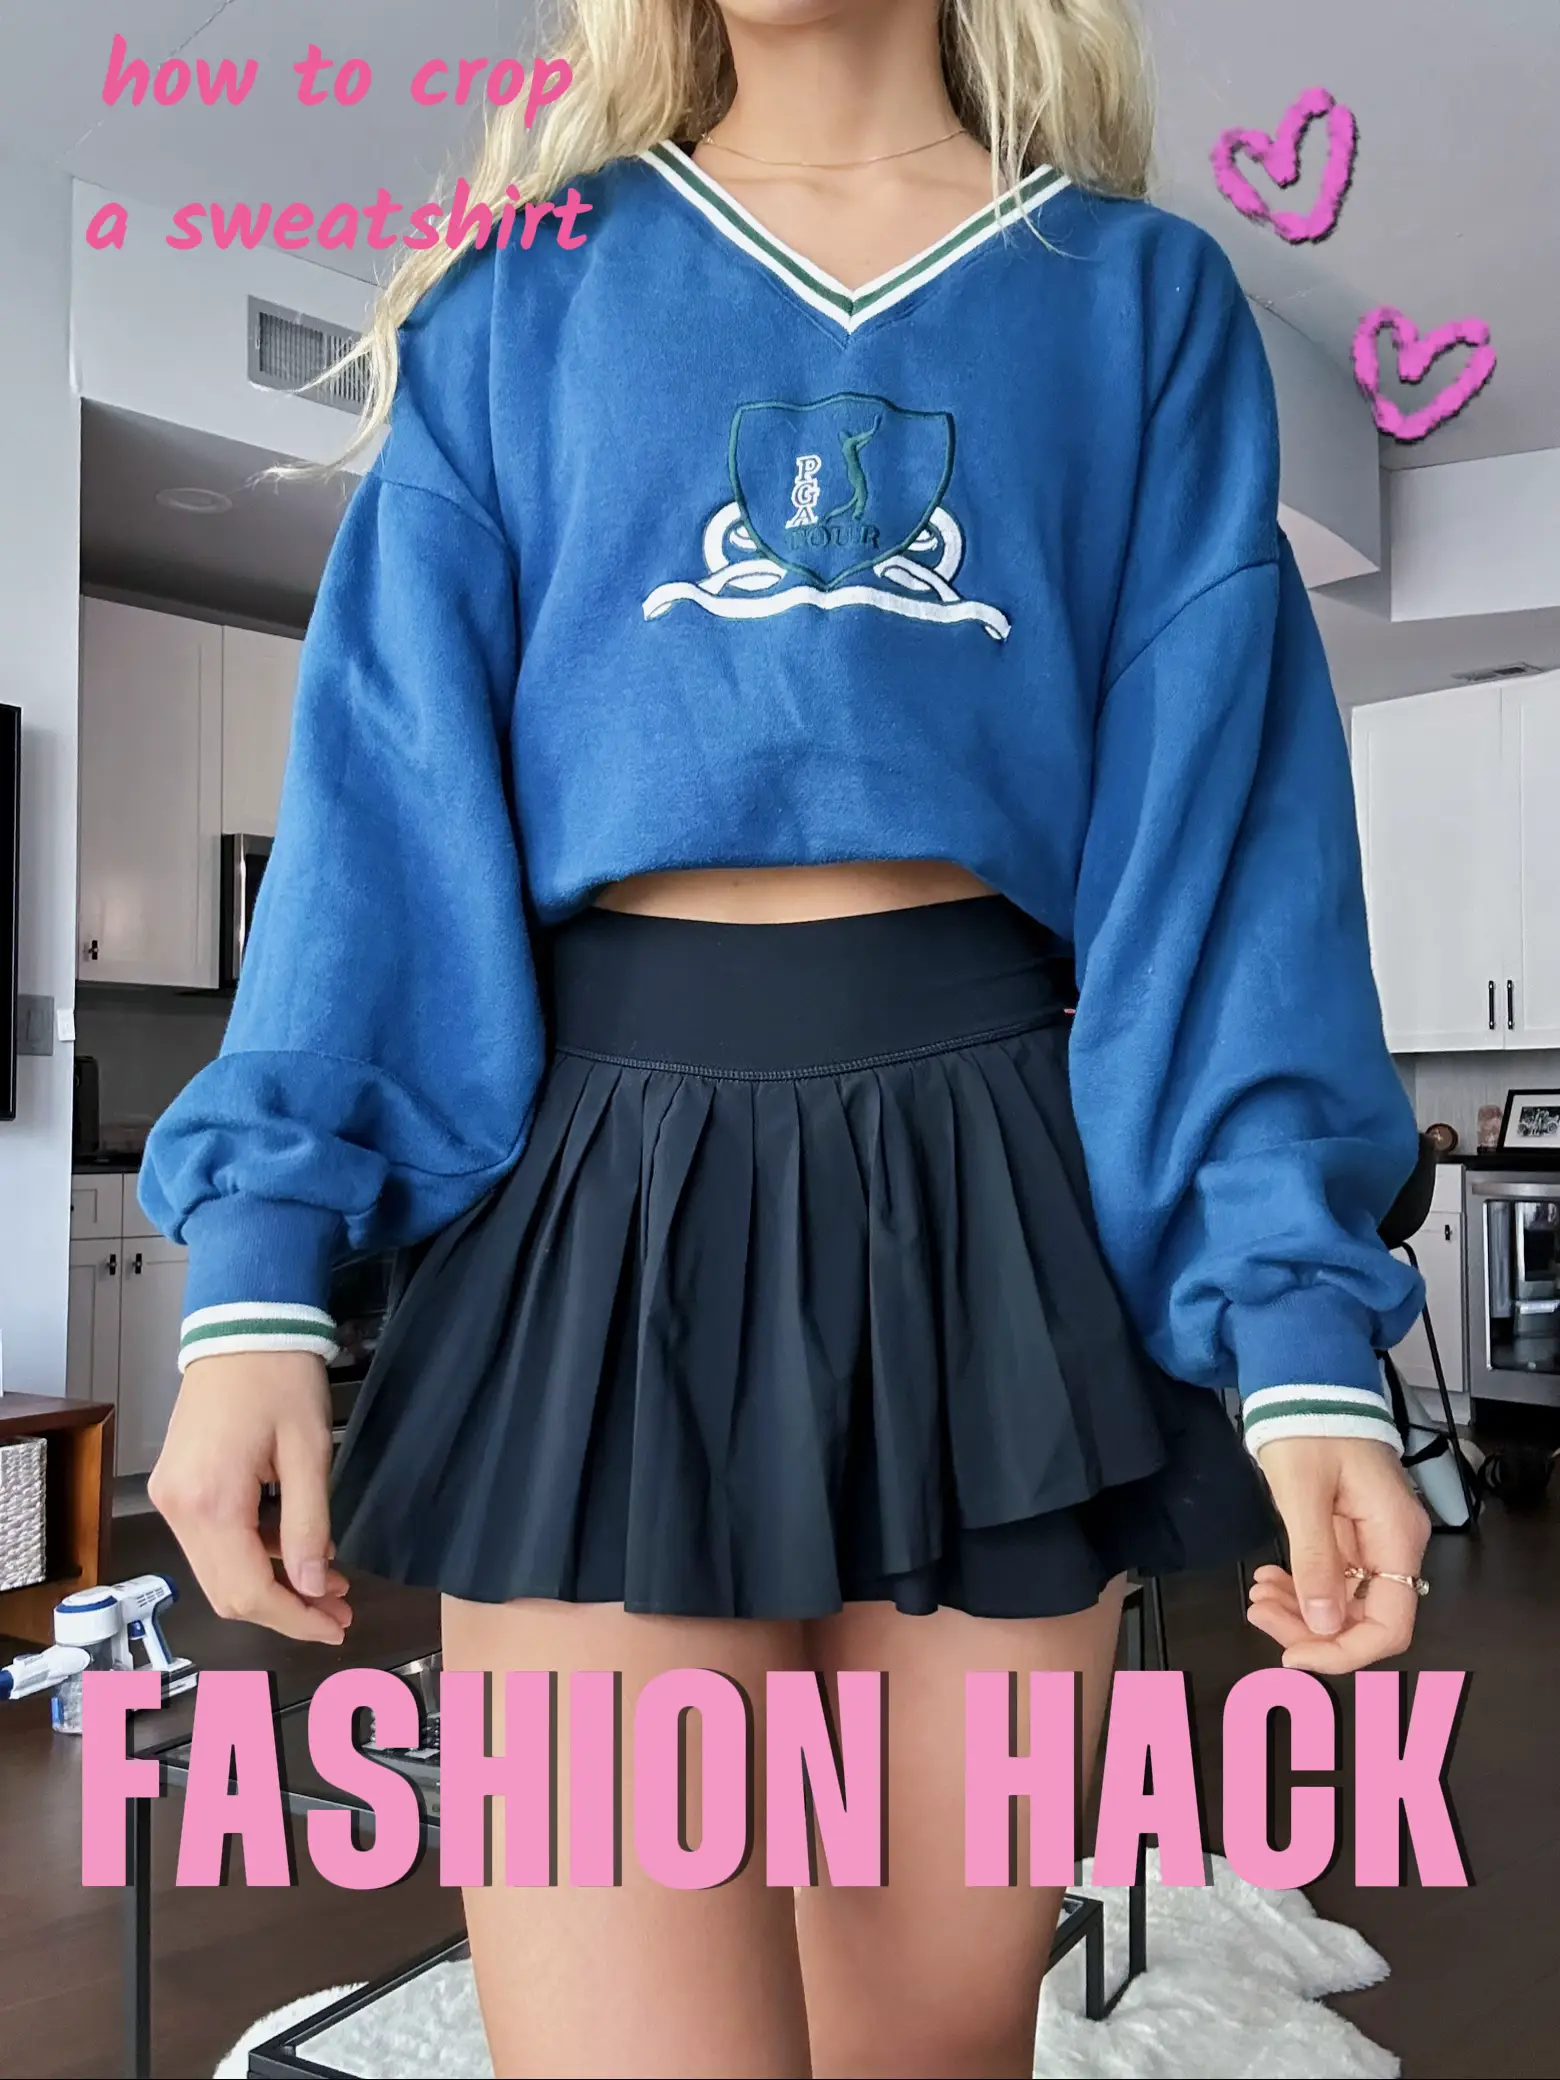 Tik Tok Hack that works! Get out of that sports bra! #hack